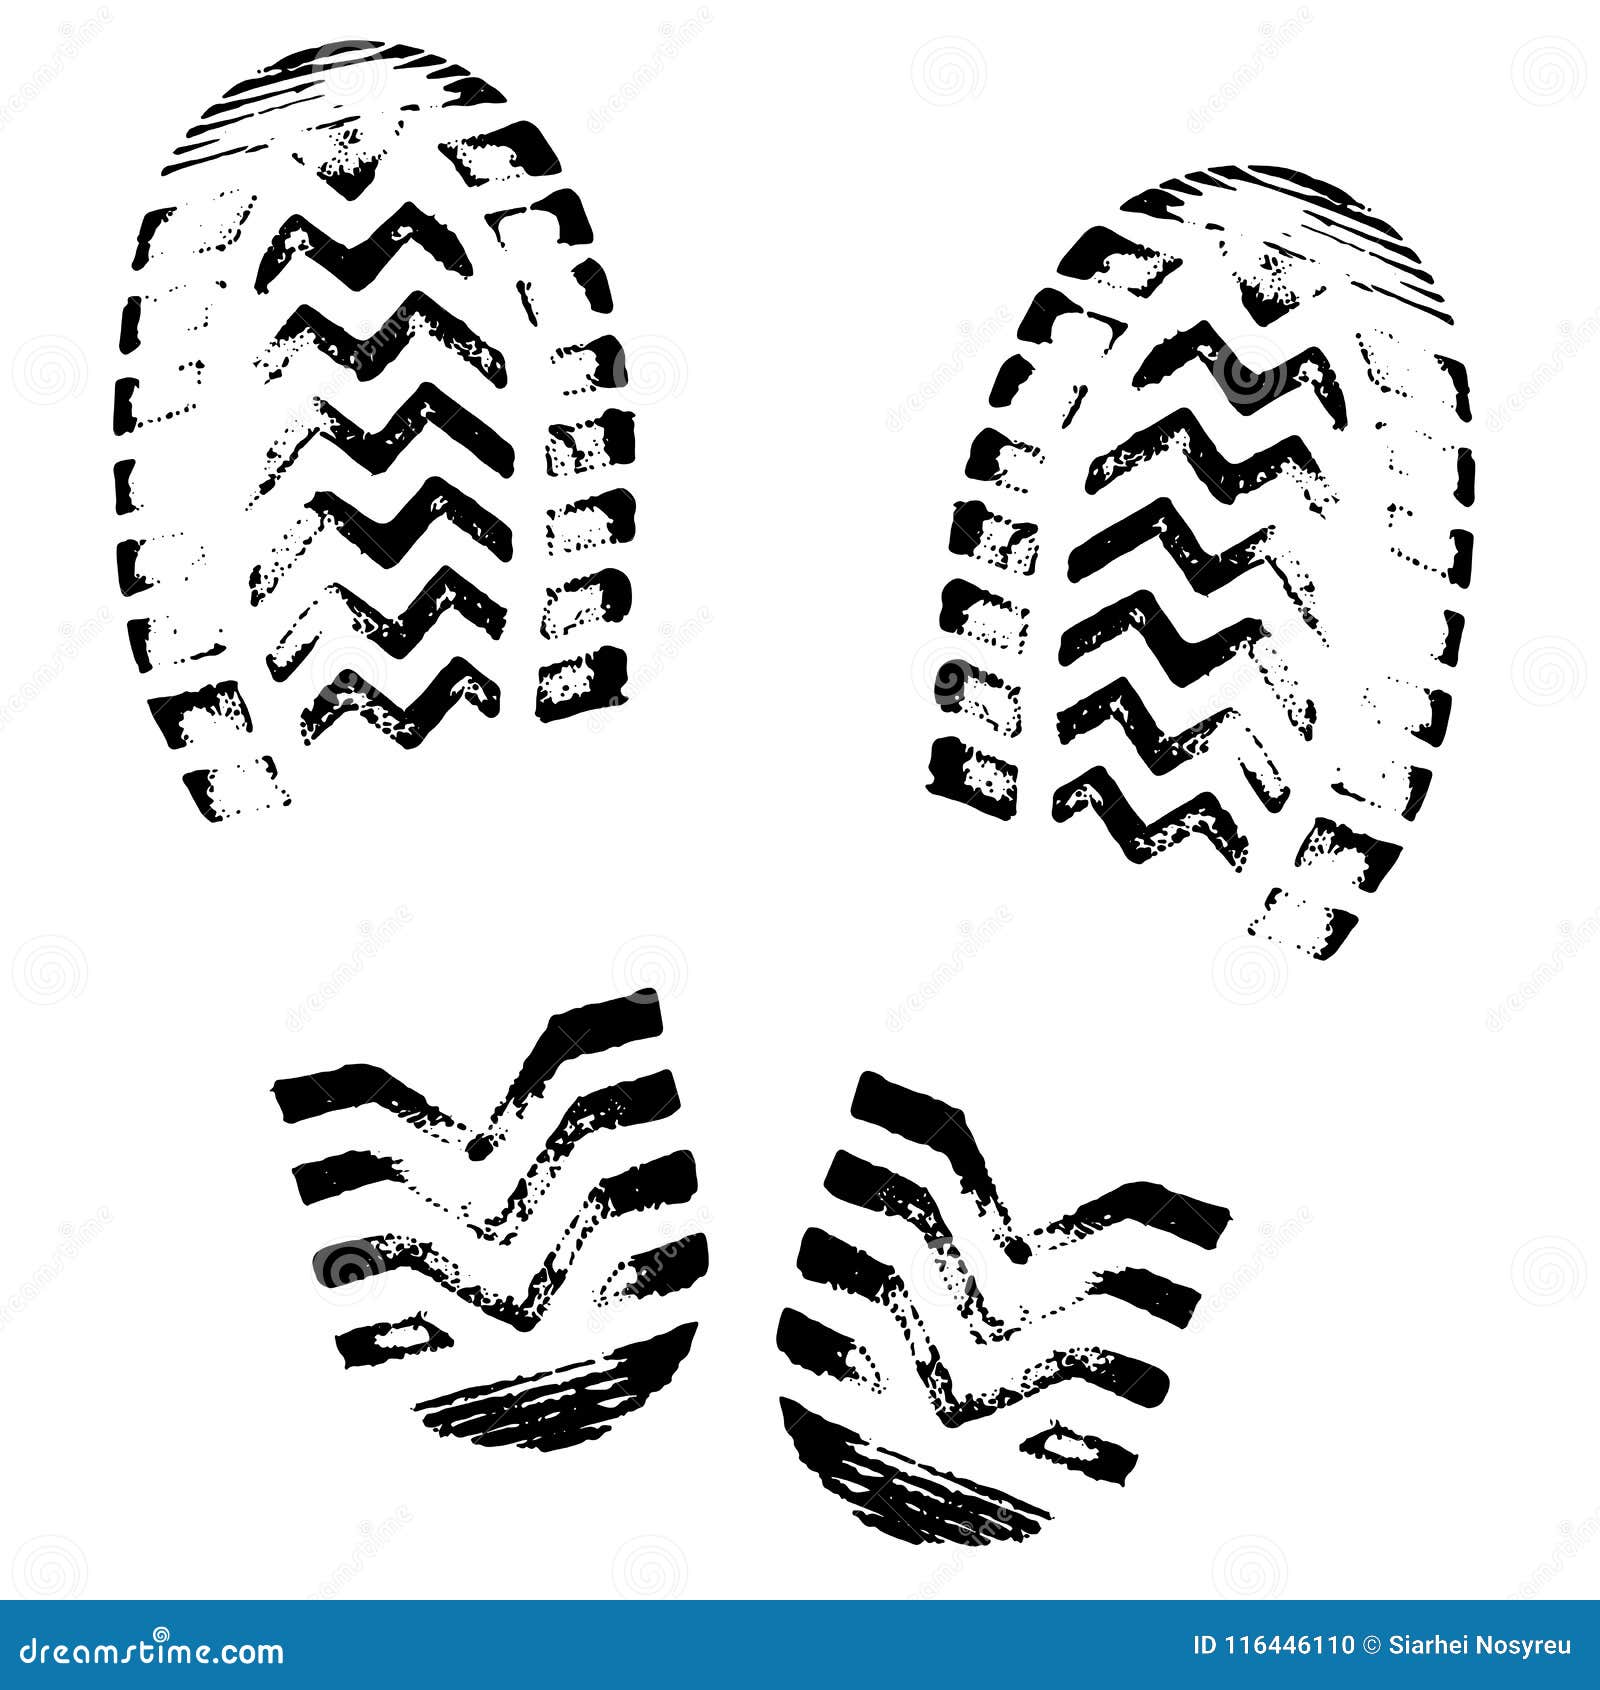 footprint, silhouette . shoe soles print. foot print tread, boots, sneakers. impression icon.